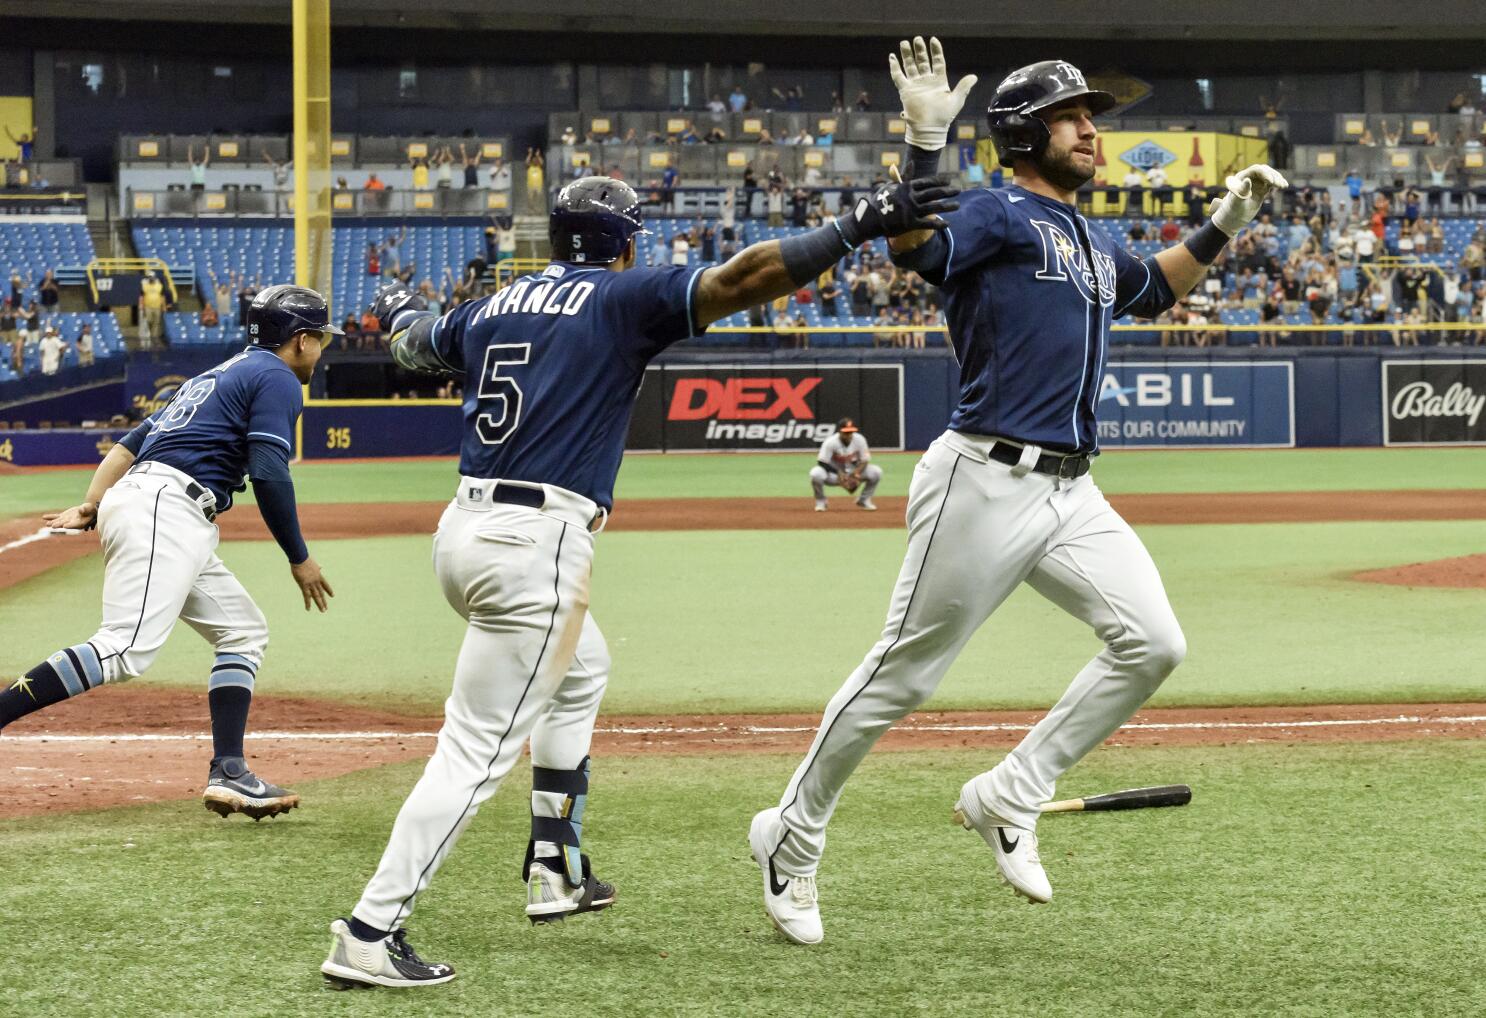 Tampa Bay Rays: 1B platoon projects to hit 30 home runs